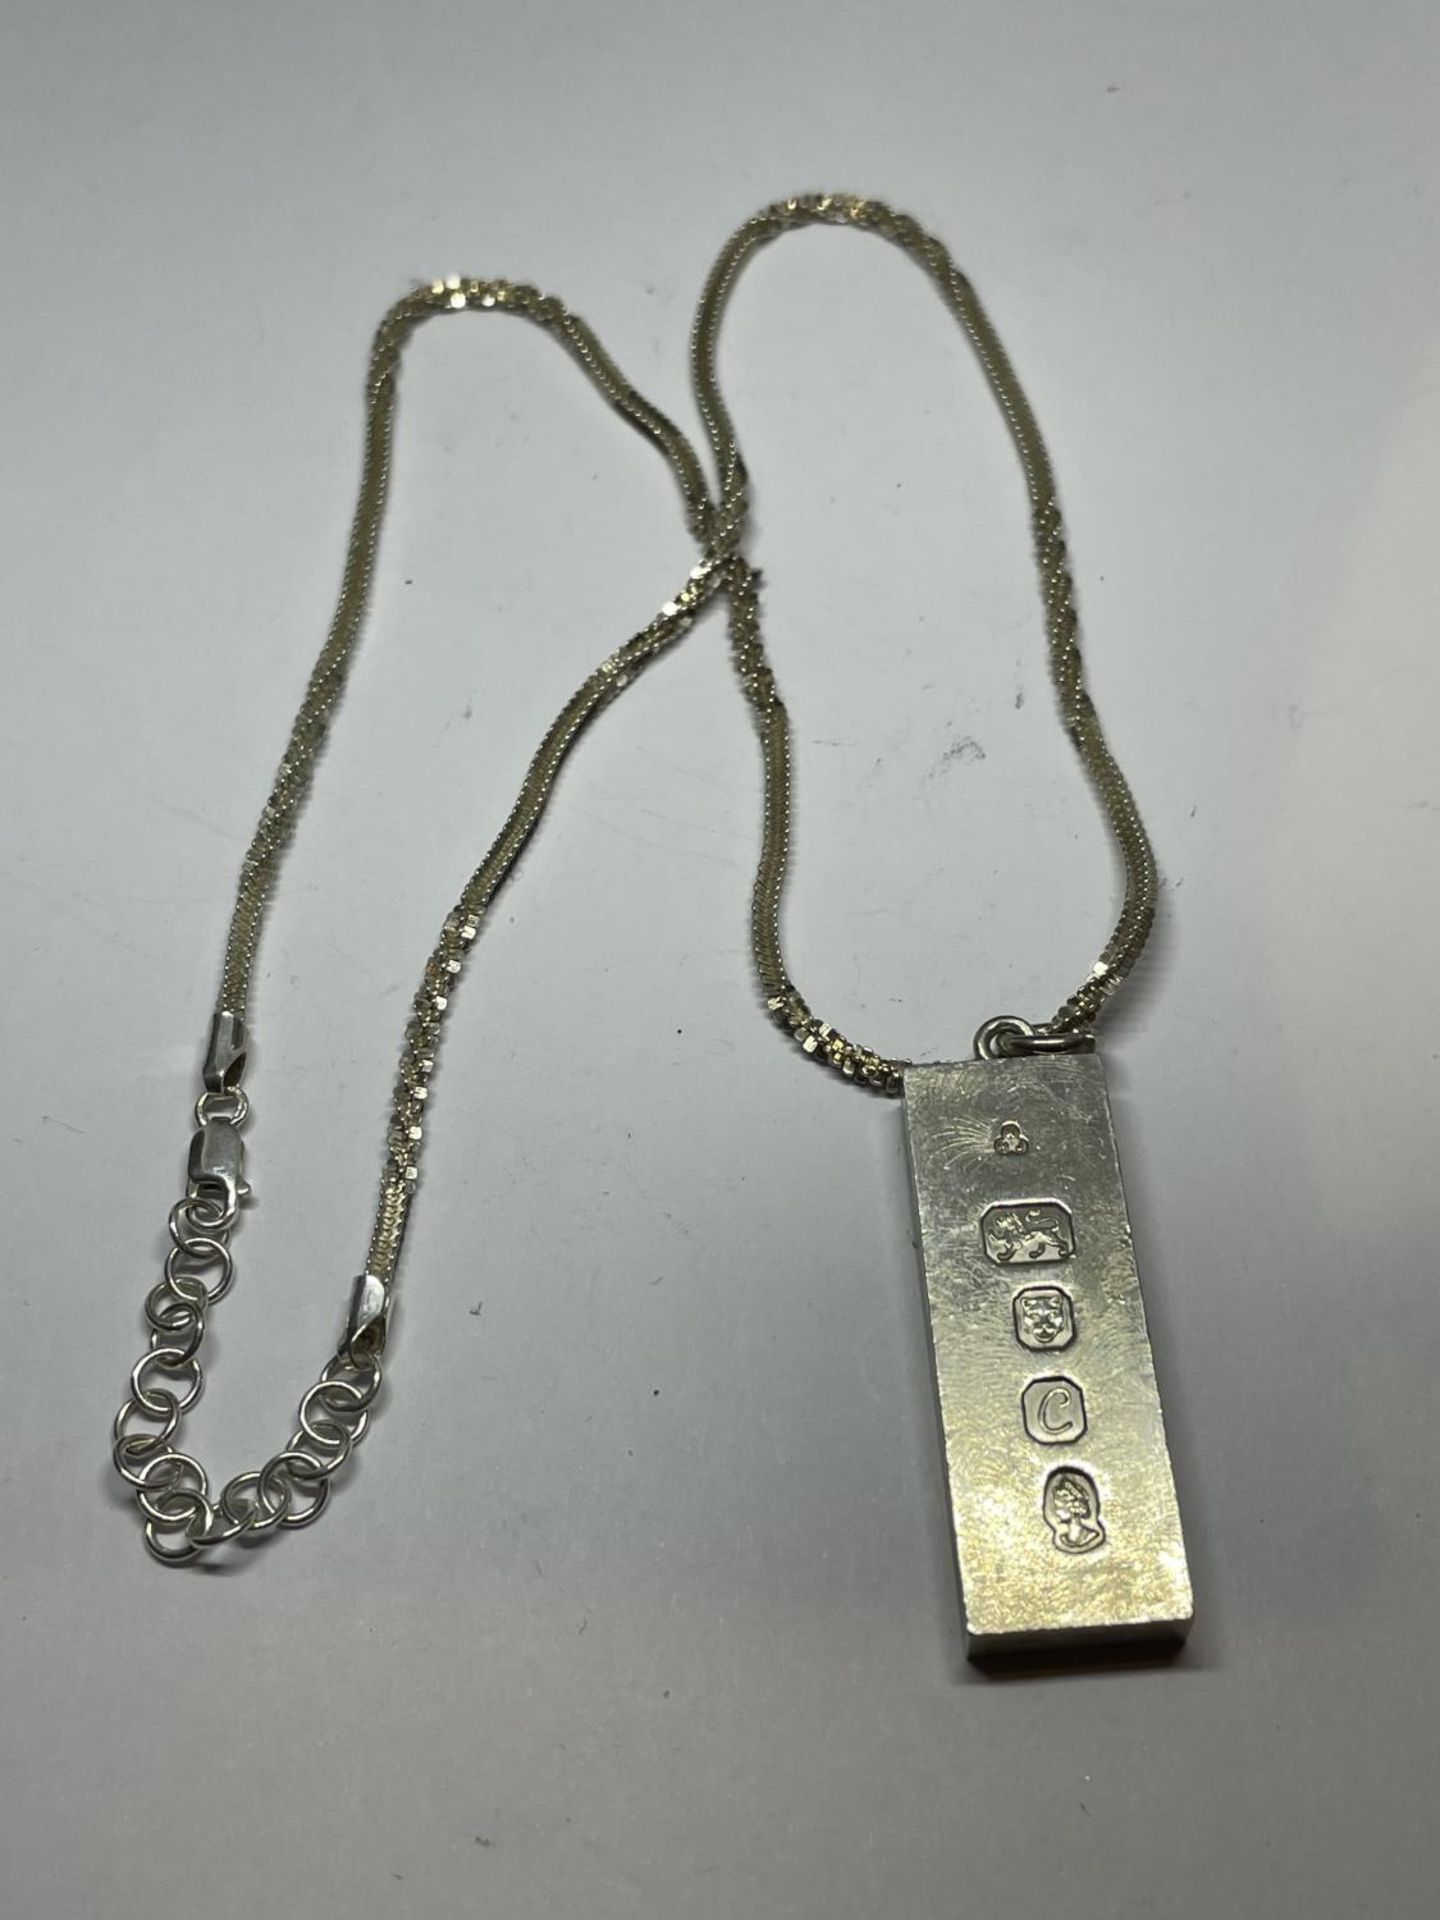 A LARGE HALLMARKED LONDON SILVER INGOT ON A MARKED 925 SILVER CHAIN